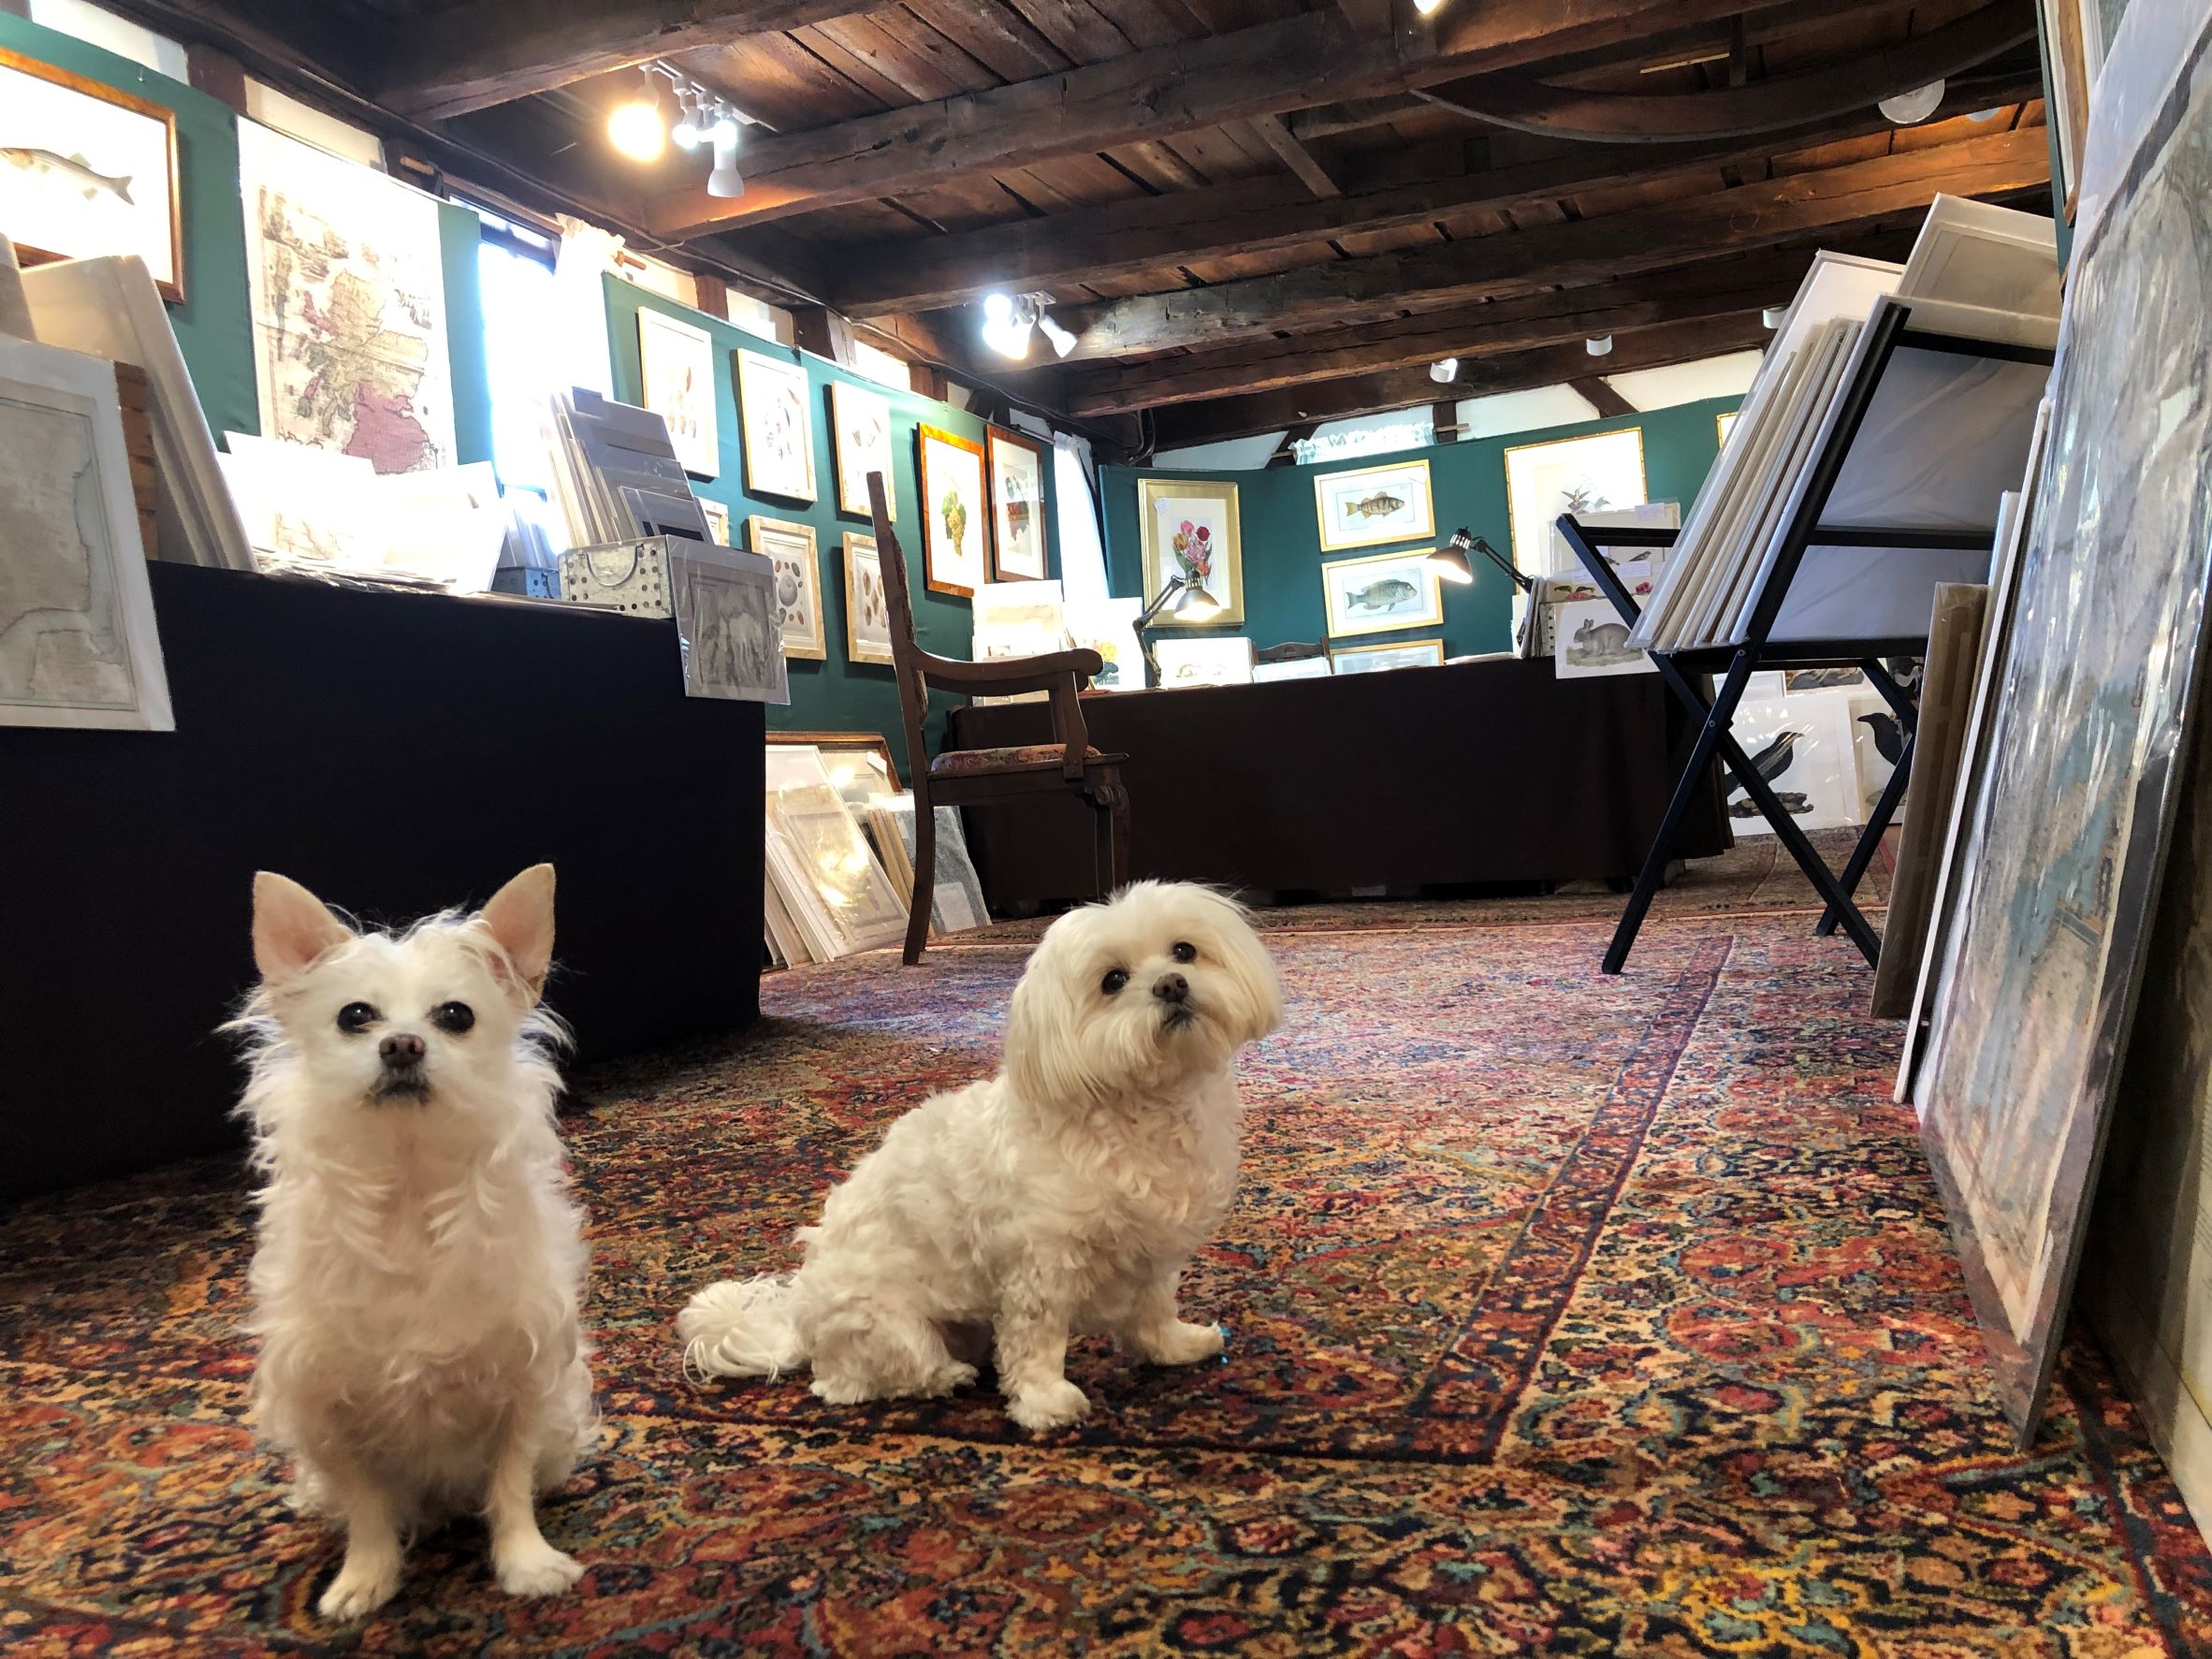 I am Pico and this is Kirby. We are the welcoming committee for Bowens Wharf Newport RI. Find us at the Antique Prints Gallery. Two charming old dogs. Lots of old maps in a historic c.1760 wharf building.